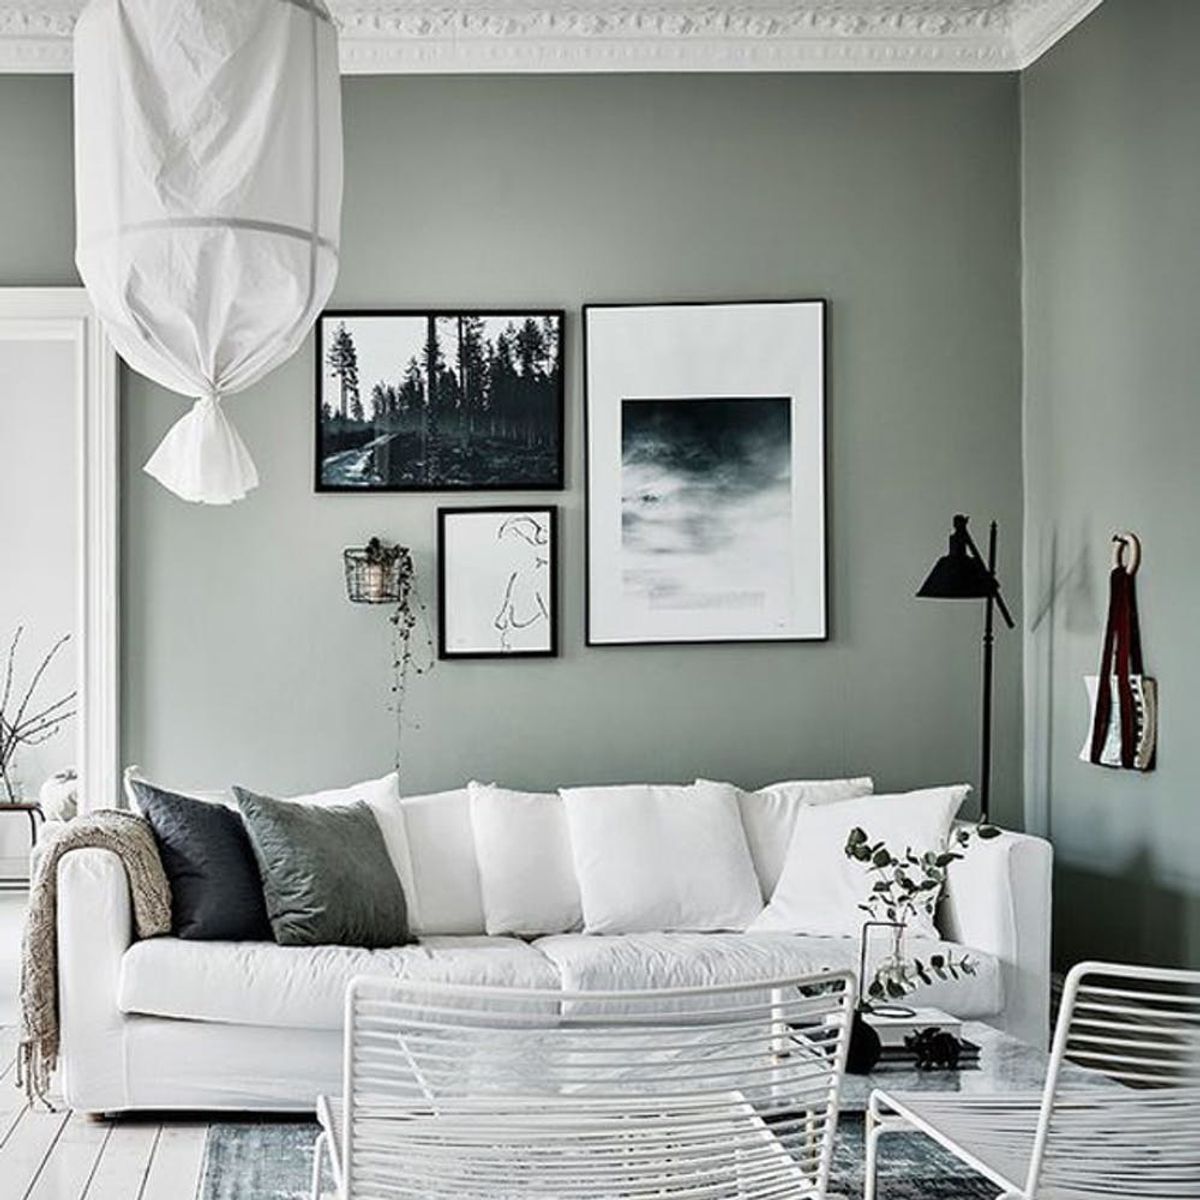 7 Reasons Why Sage Is the *It* Color for Your Home in 2018